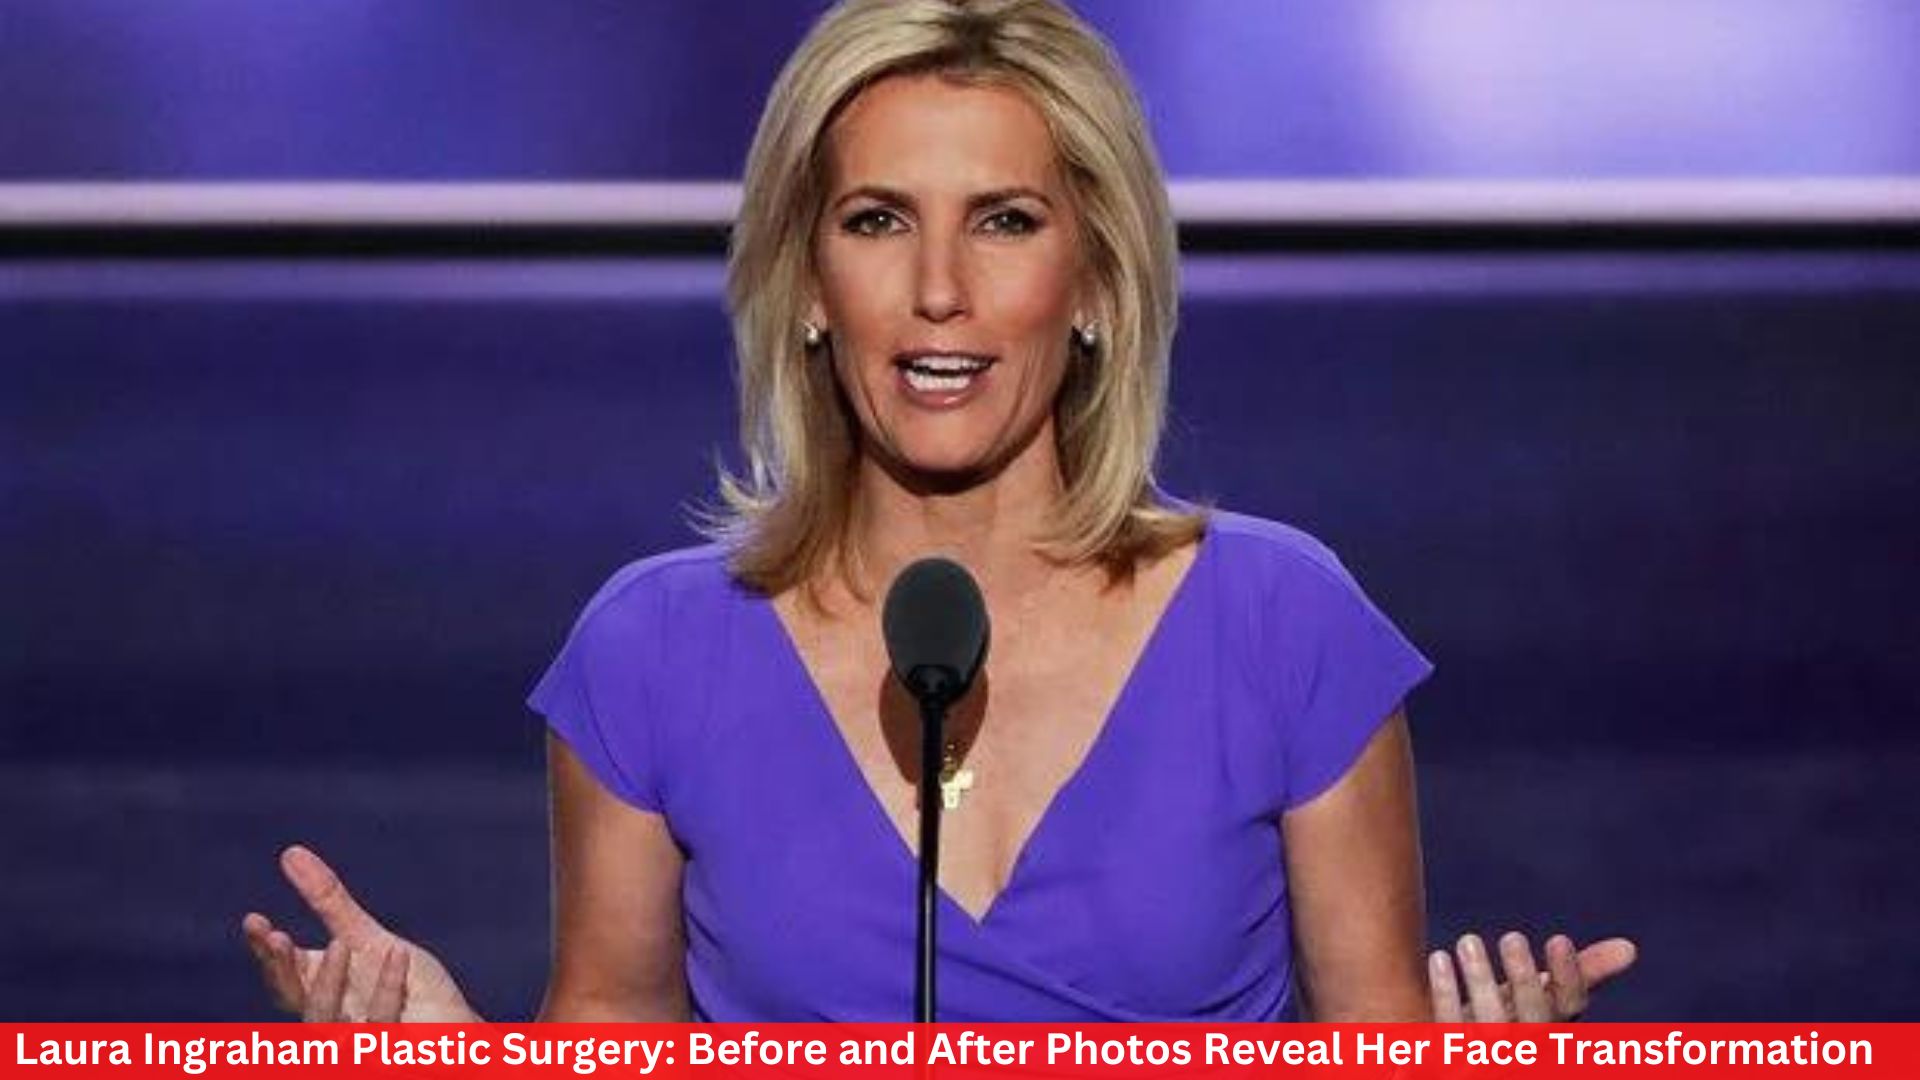 Laura Ingraham Plastic Surgery: Before and After Photos Reveal Her Face Transformation